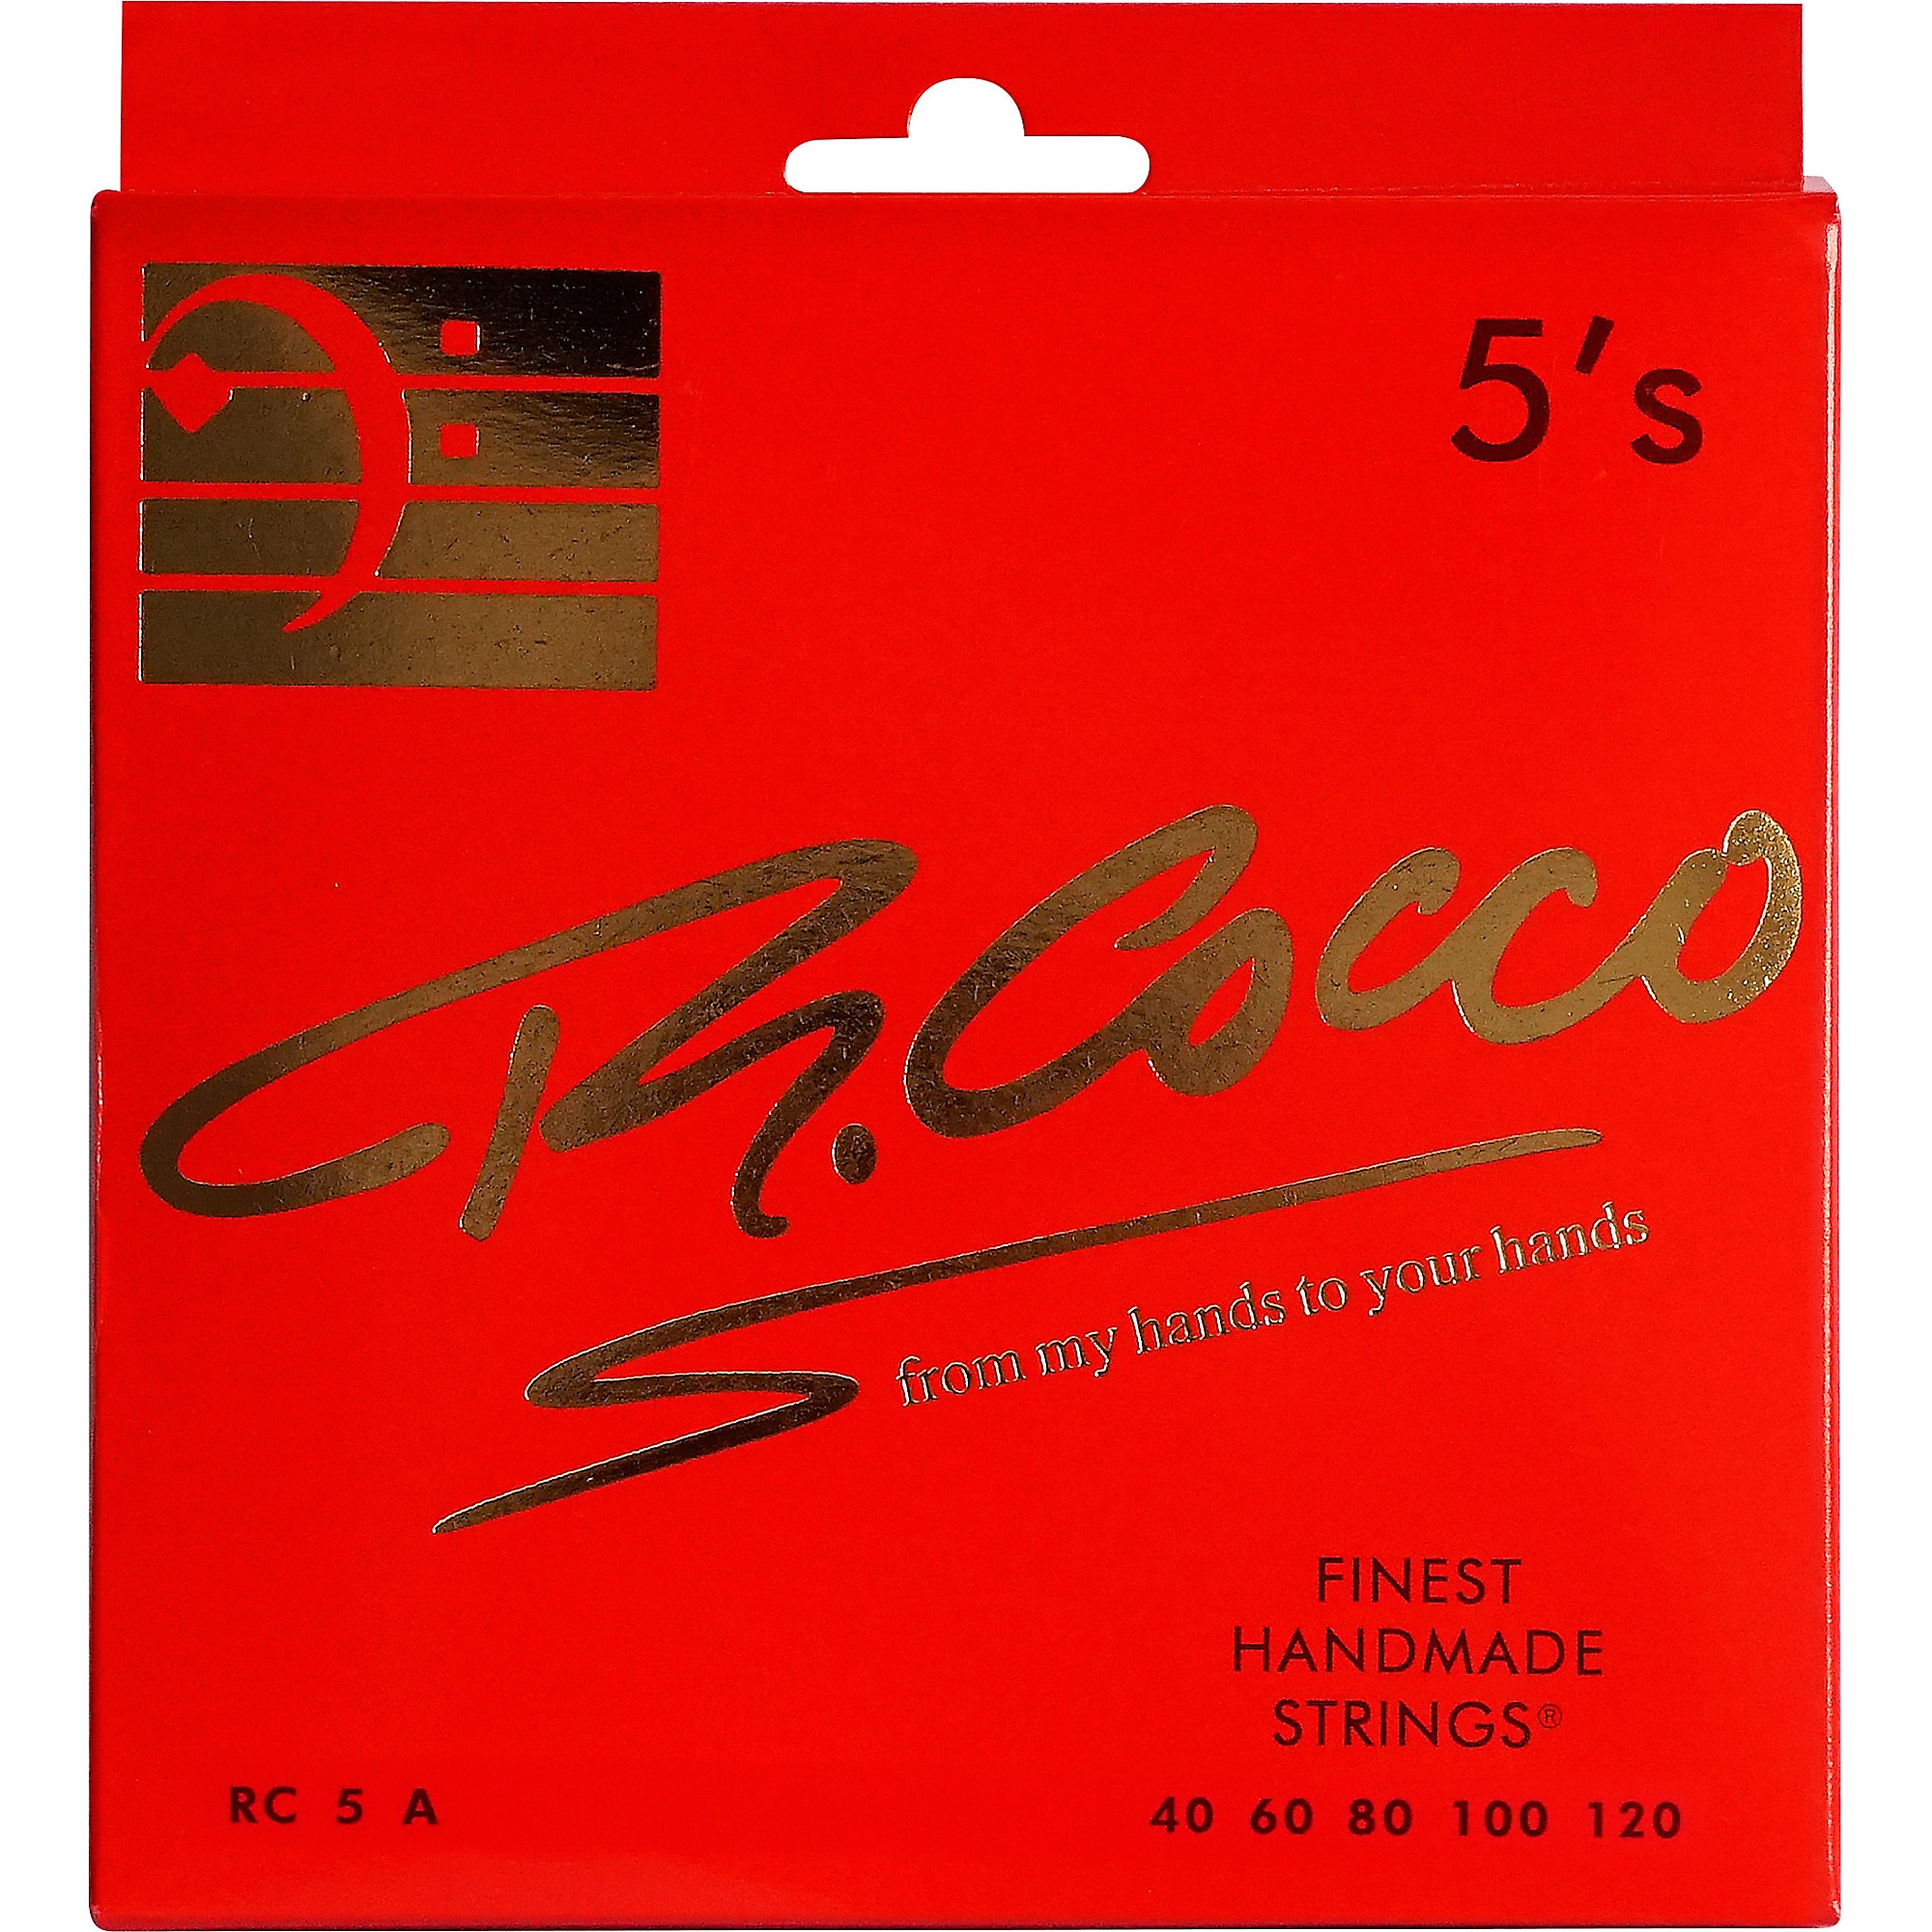 Richard　Strings　Cocco　Bass　RC5FATP　5-String　Electric　Guitar　Music　Arts